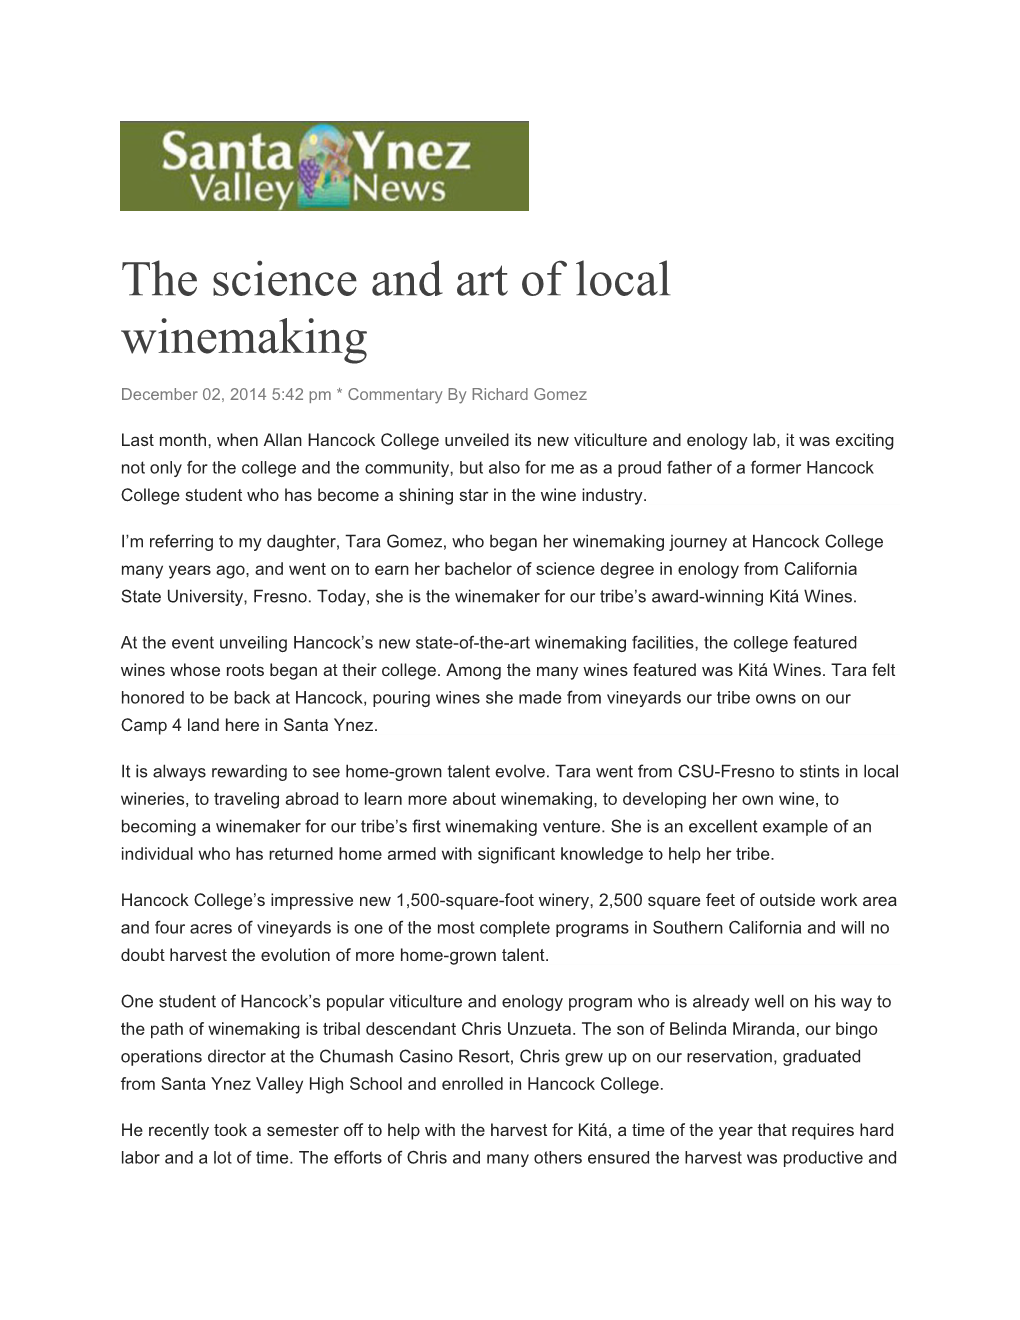 The Science and Art of Local Winemaking